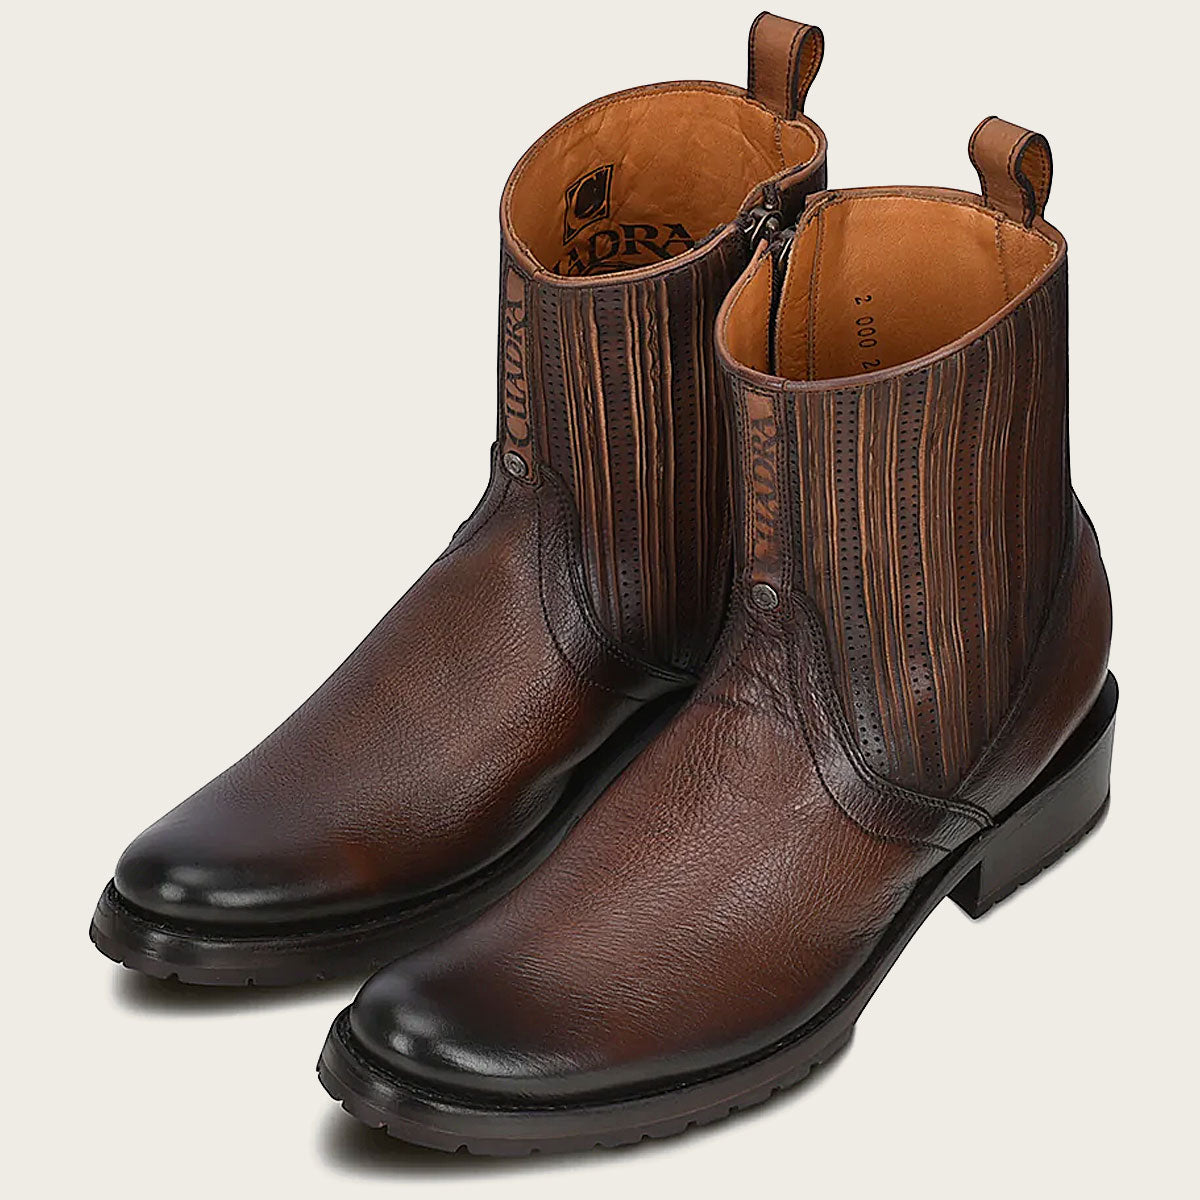 Hand-painted honey leather men's boot with engraved logo and perforated details